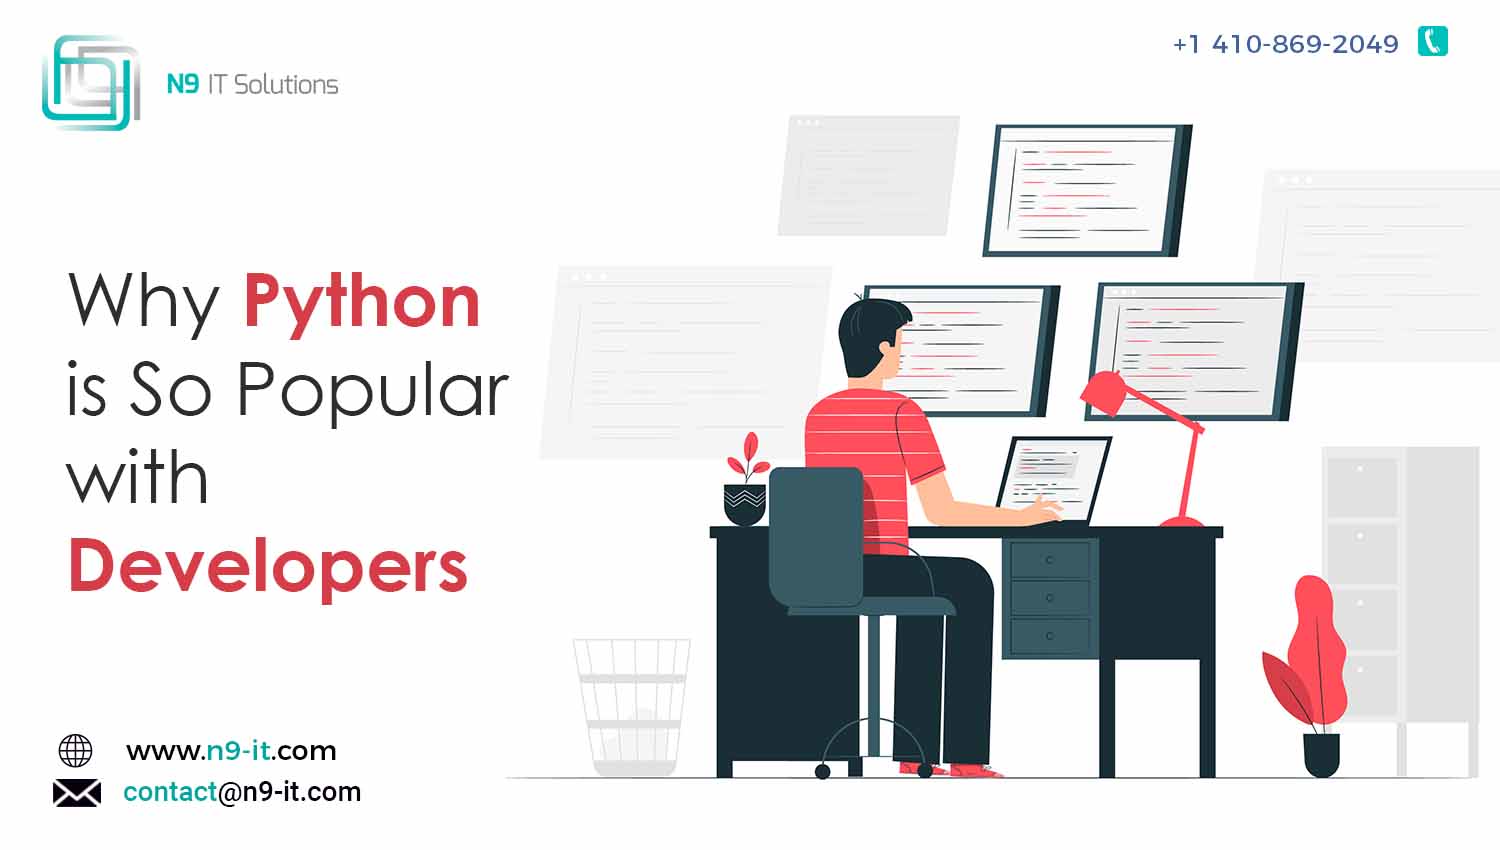 Why Python is So Popular with Developers